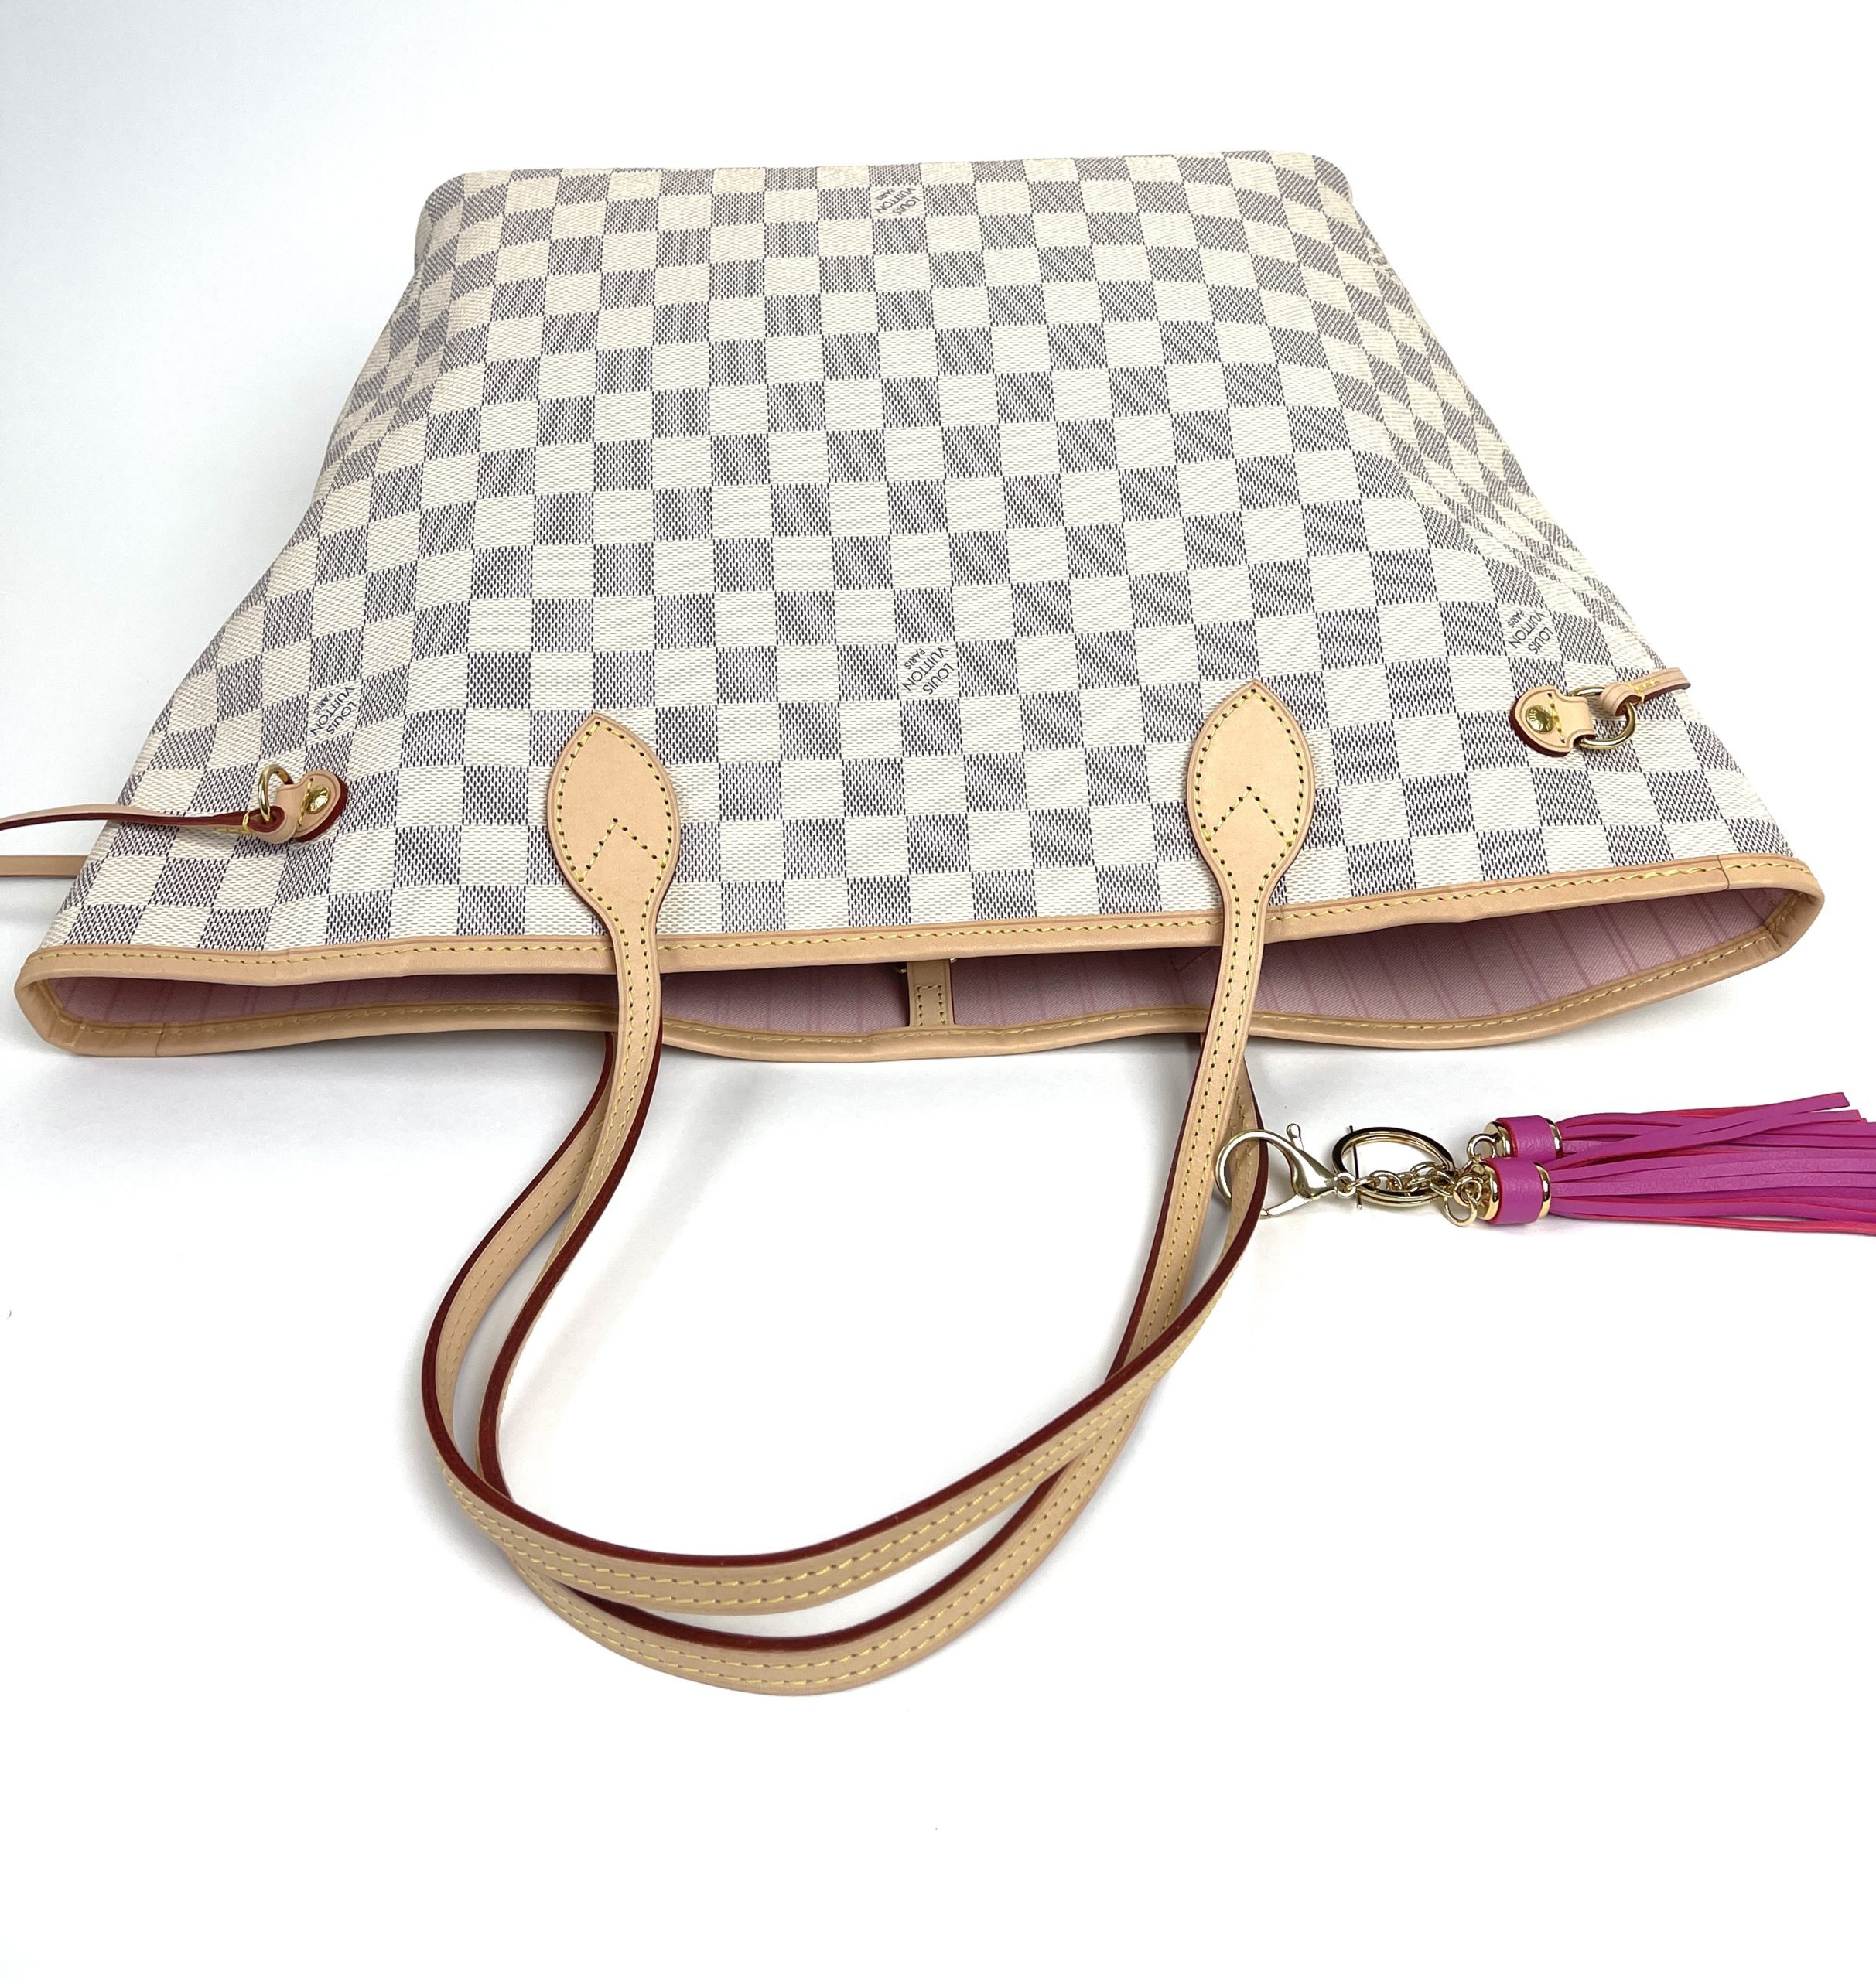 Louis Vuitton Neverfull MM Azur Rose with Pouch – Now You Glow